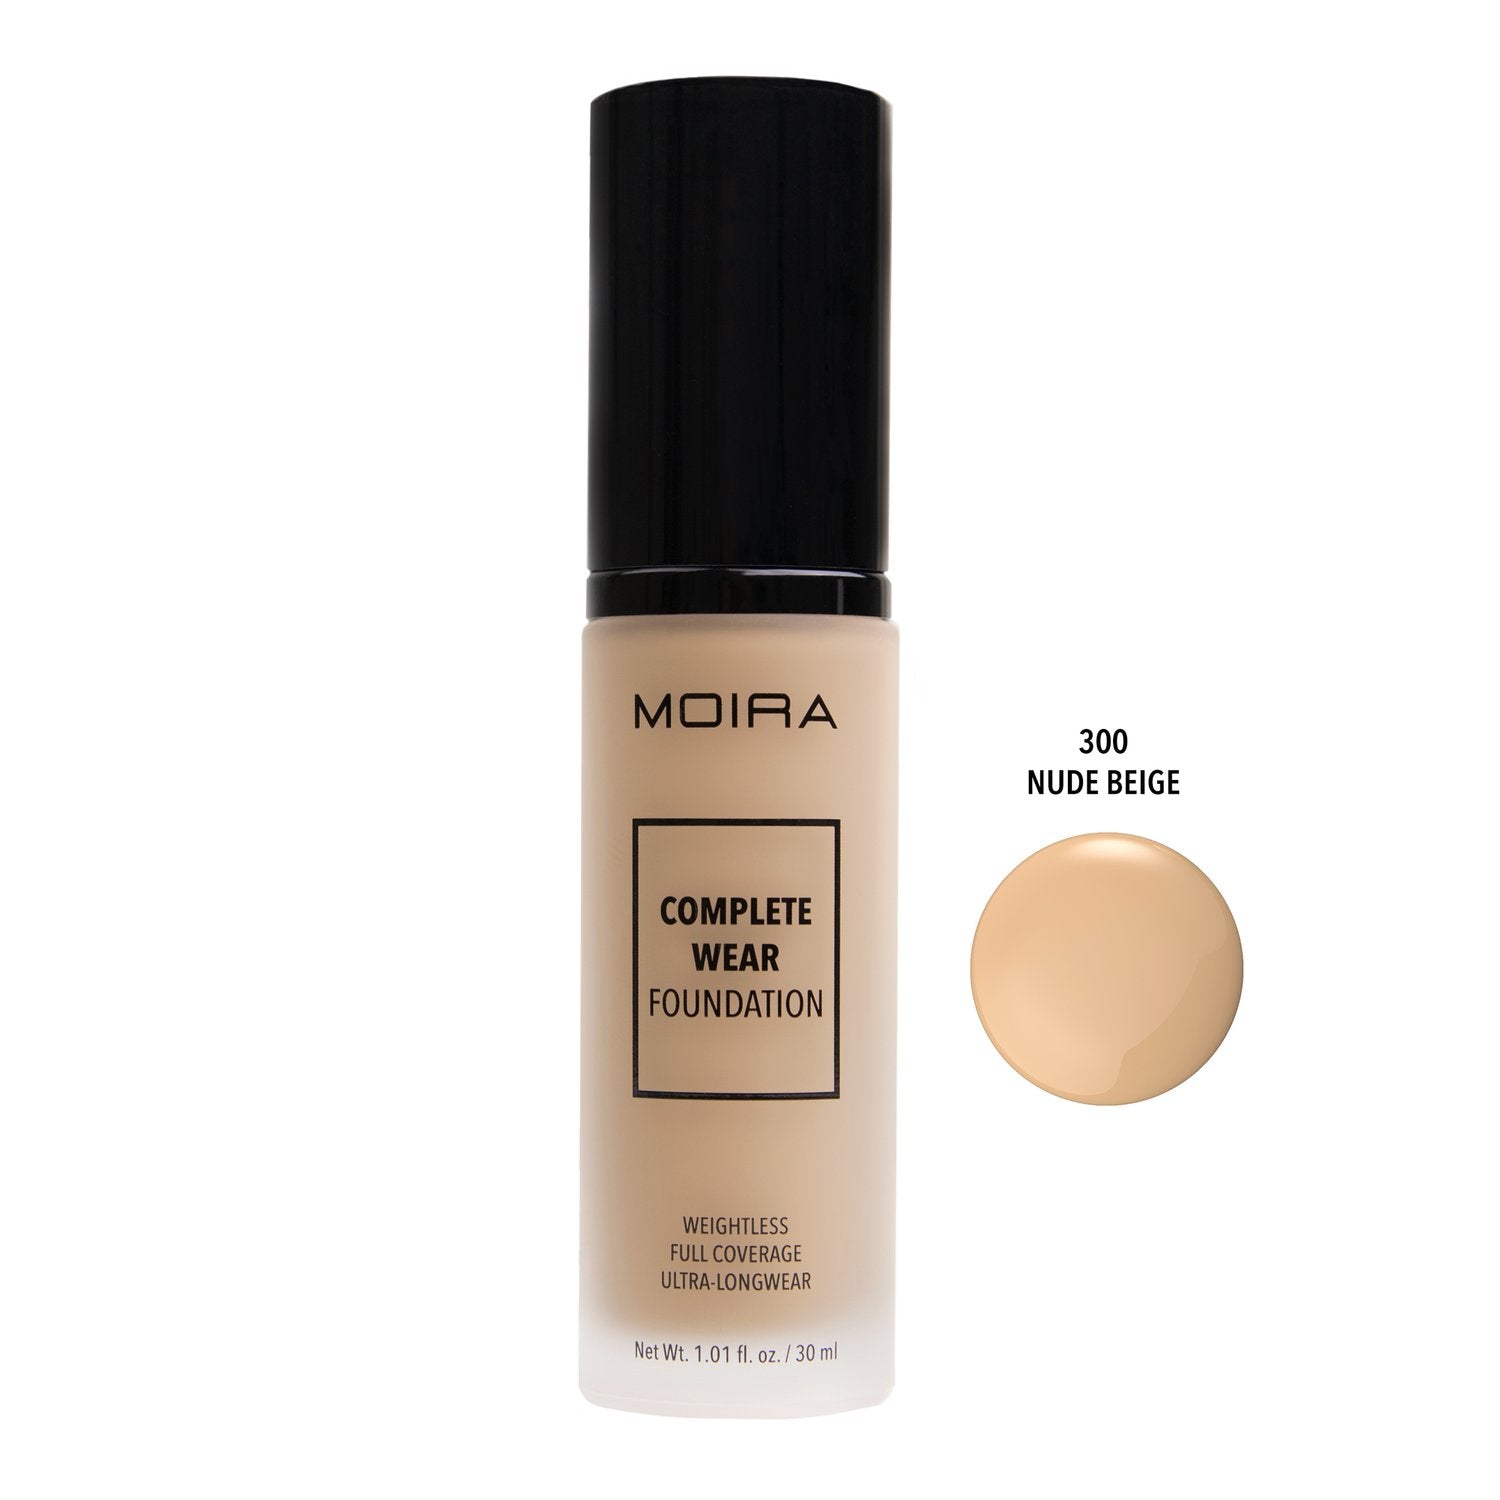 Complete Wear Foundation by Moira Cosmetics